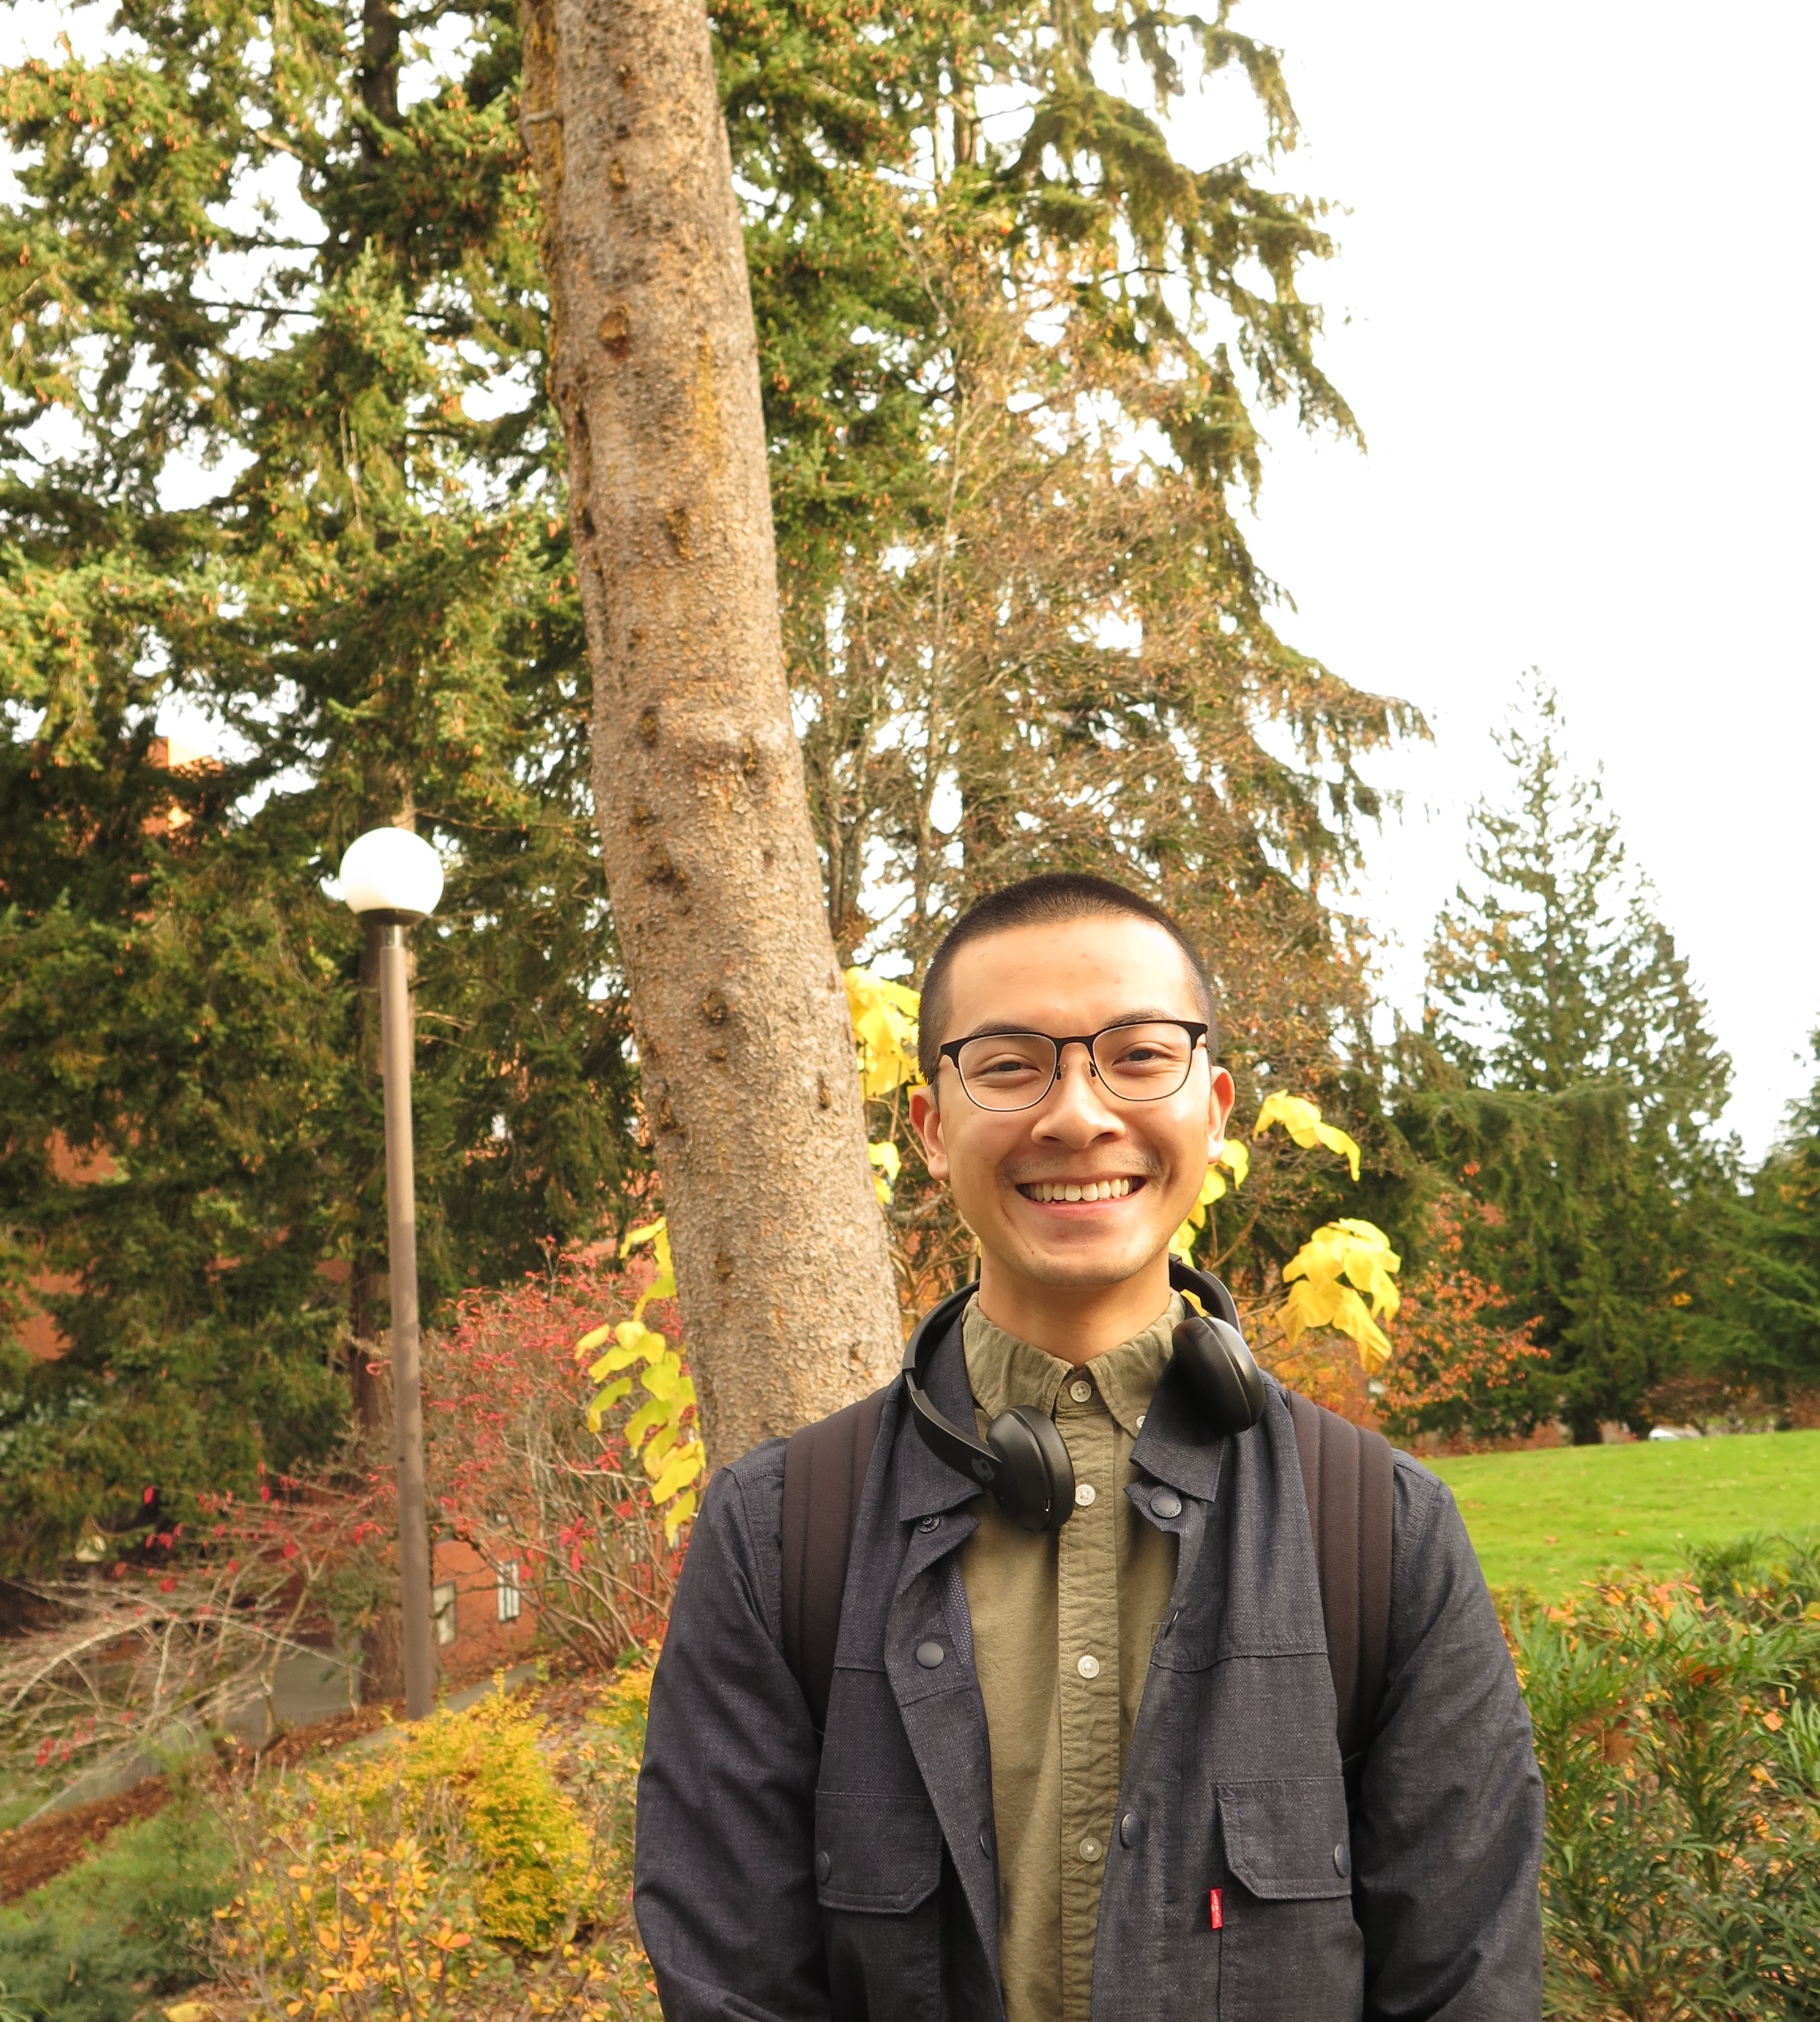 Portrait of Peter Cung standing in front of a tree and lawn, wearing a green button-down shirt, Levi&#039;s trucker jacket, black bluetooth headphones, black metal glasses, and black backpack